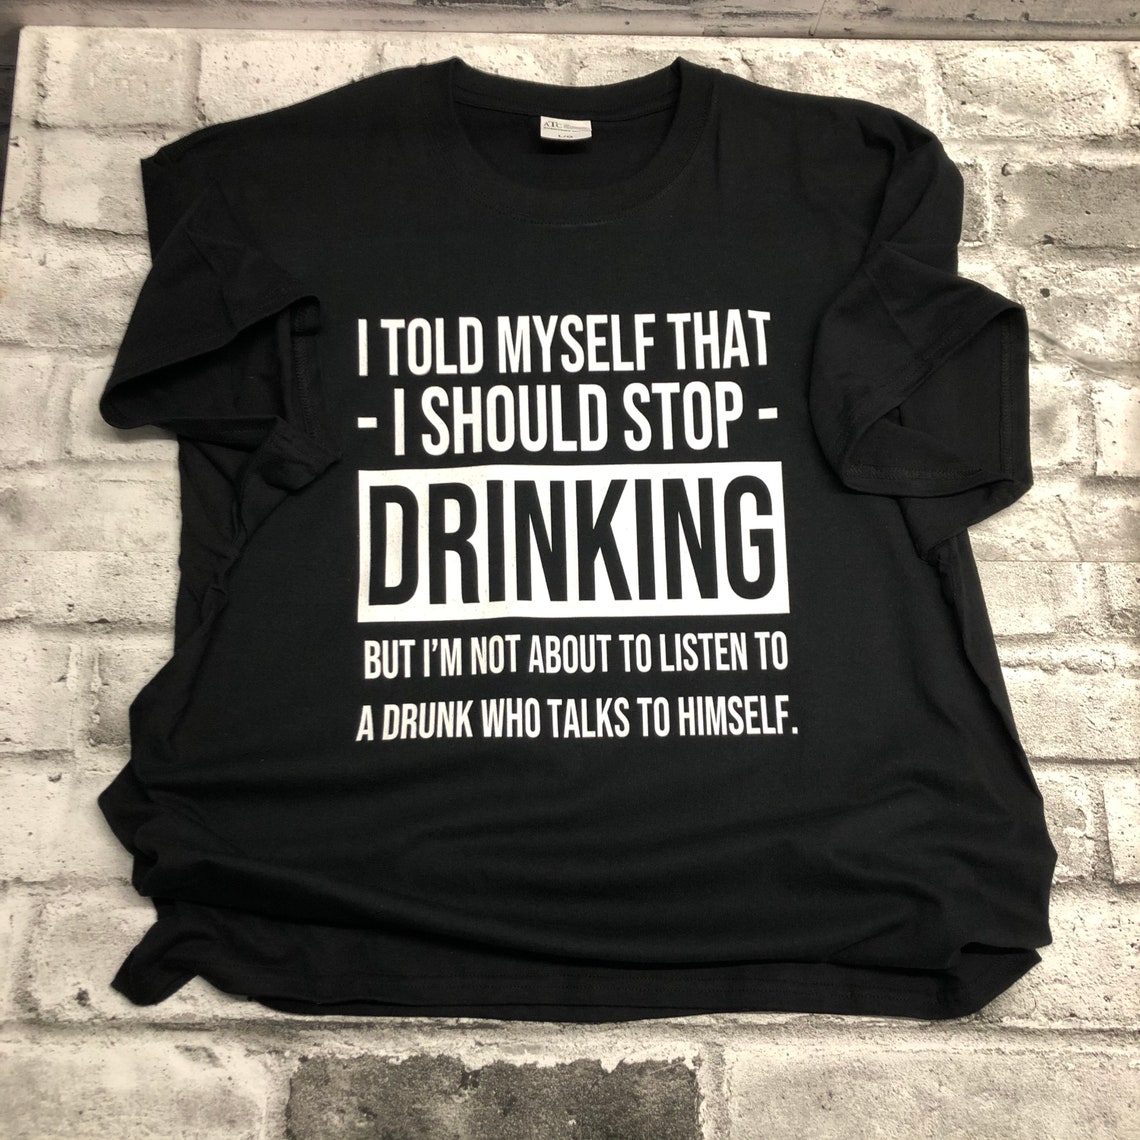 I told myself I should stop drinking...Adult T-Shirt | Etsy